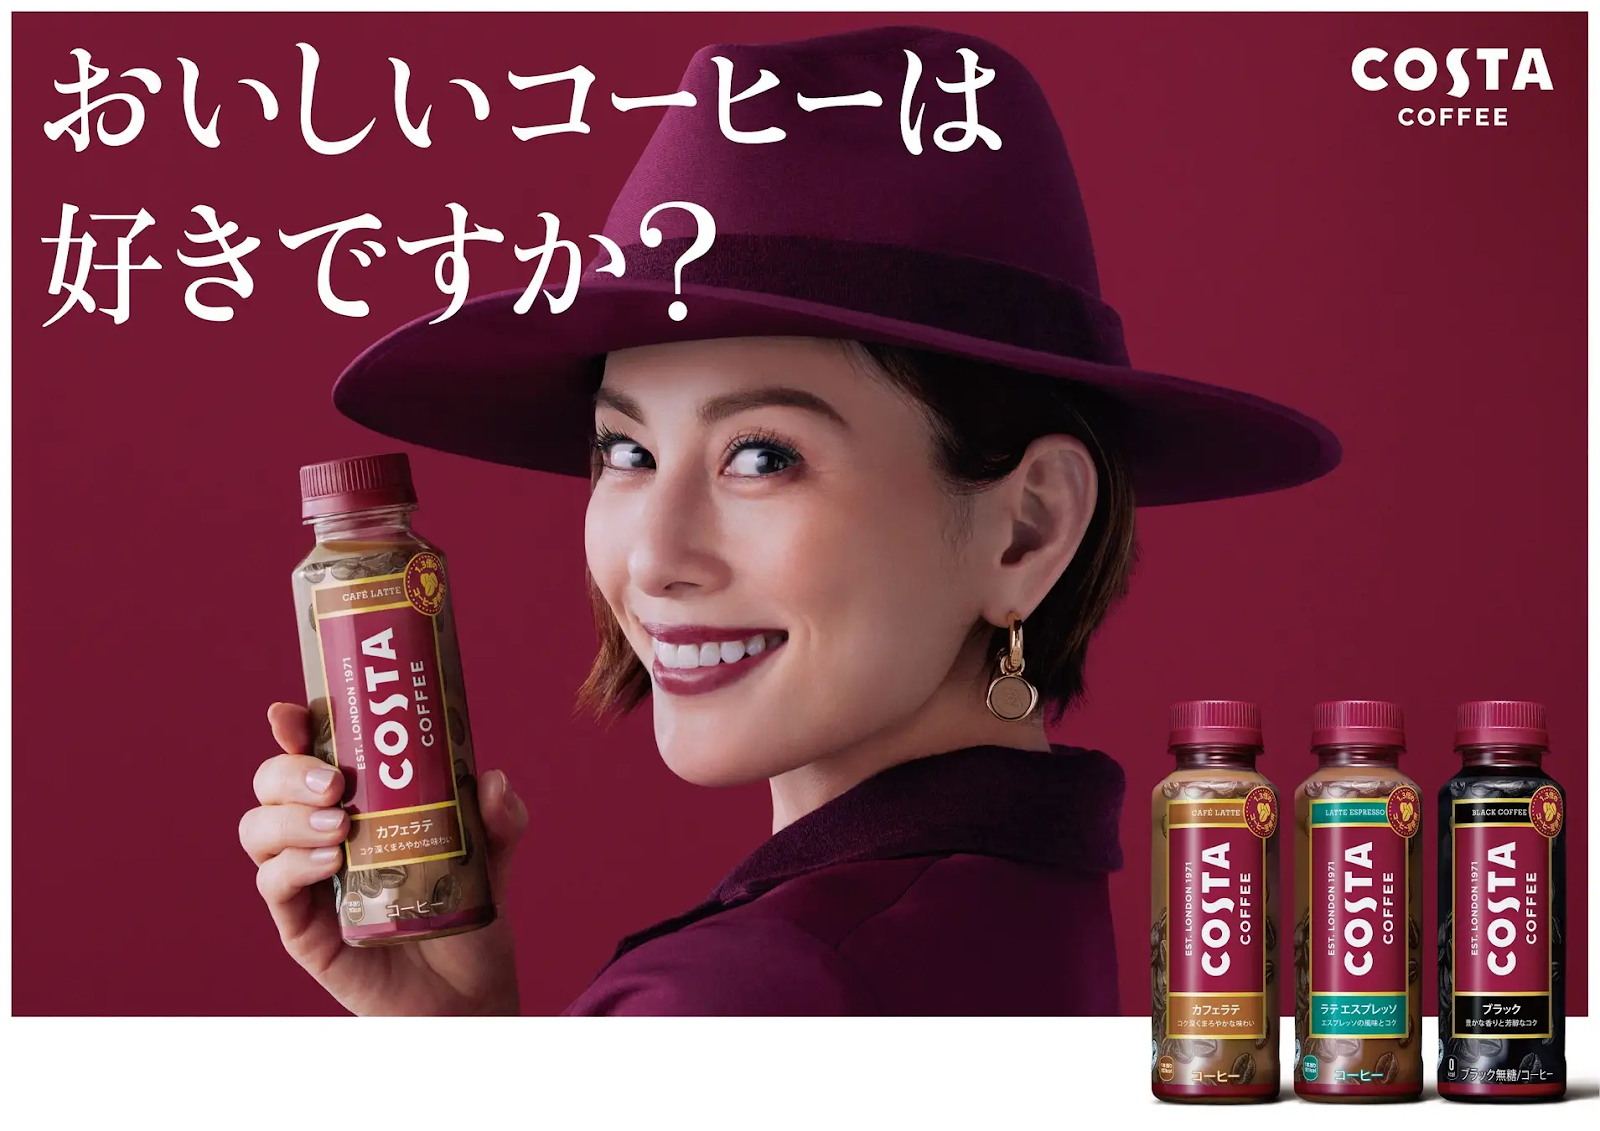 Costa Coffee's new RTD (ready to drink) coffee localised for the Japanese market. The advert here features a Japanese celebrity - Ryoko Yonekura.